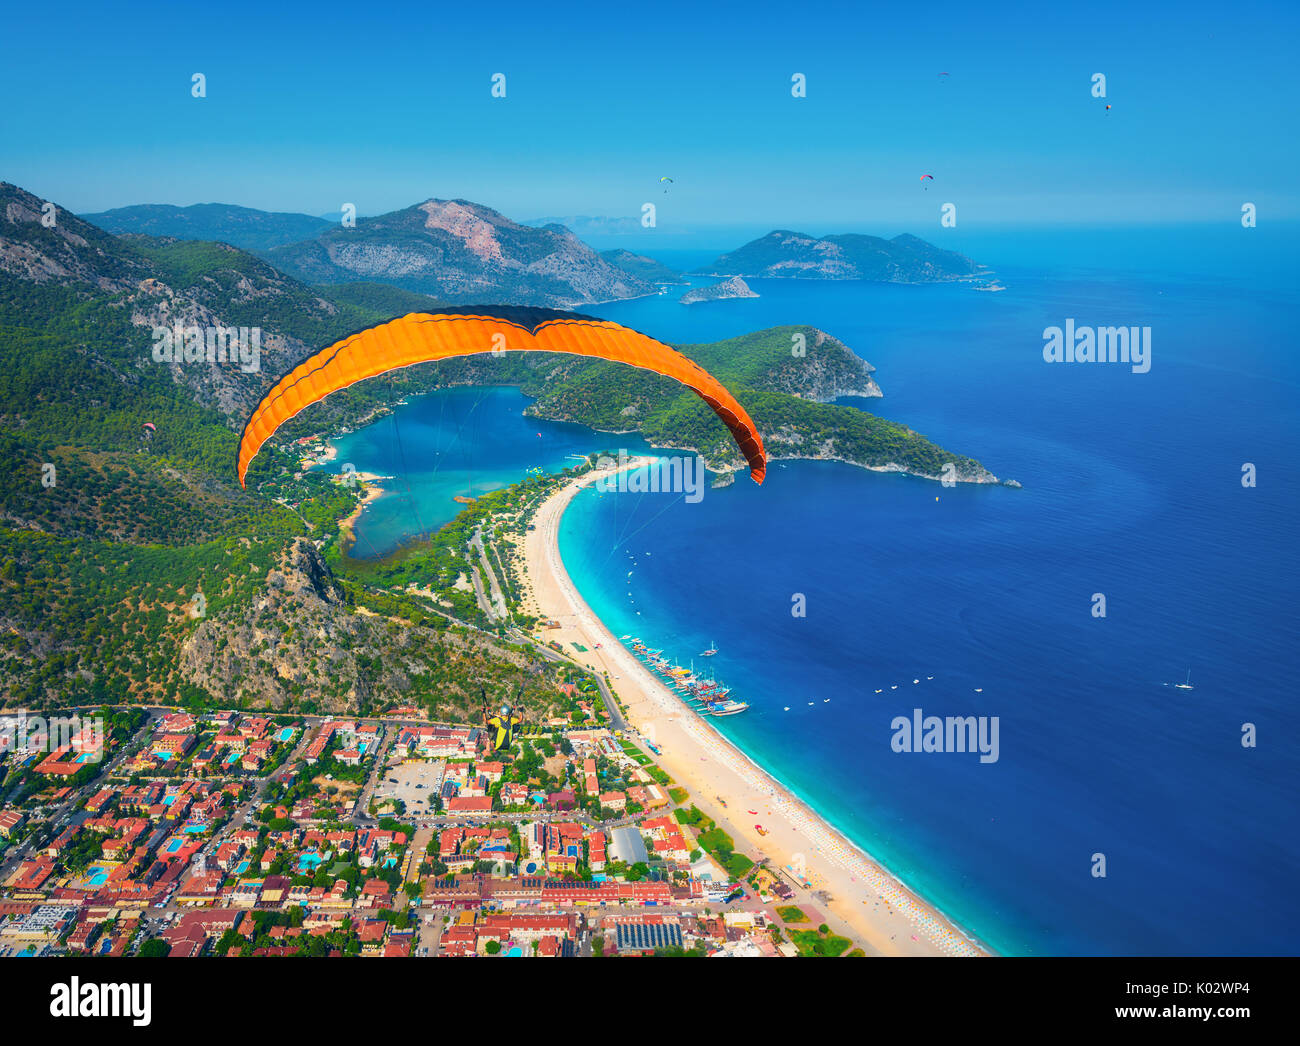 Paragliding in the sky. Paraglider tandem flying over the sea with blue water and mountains in bright sunny day. Aerial view of paraglider and Blue La Stock Photo